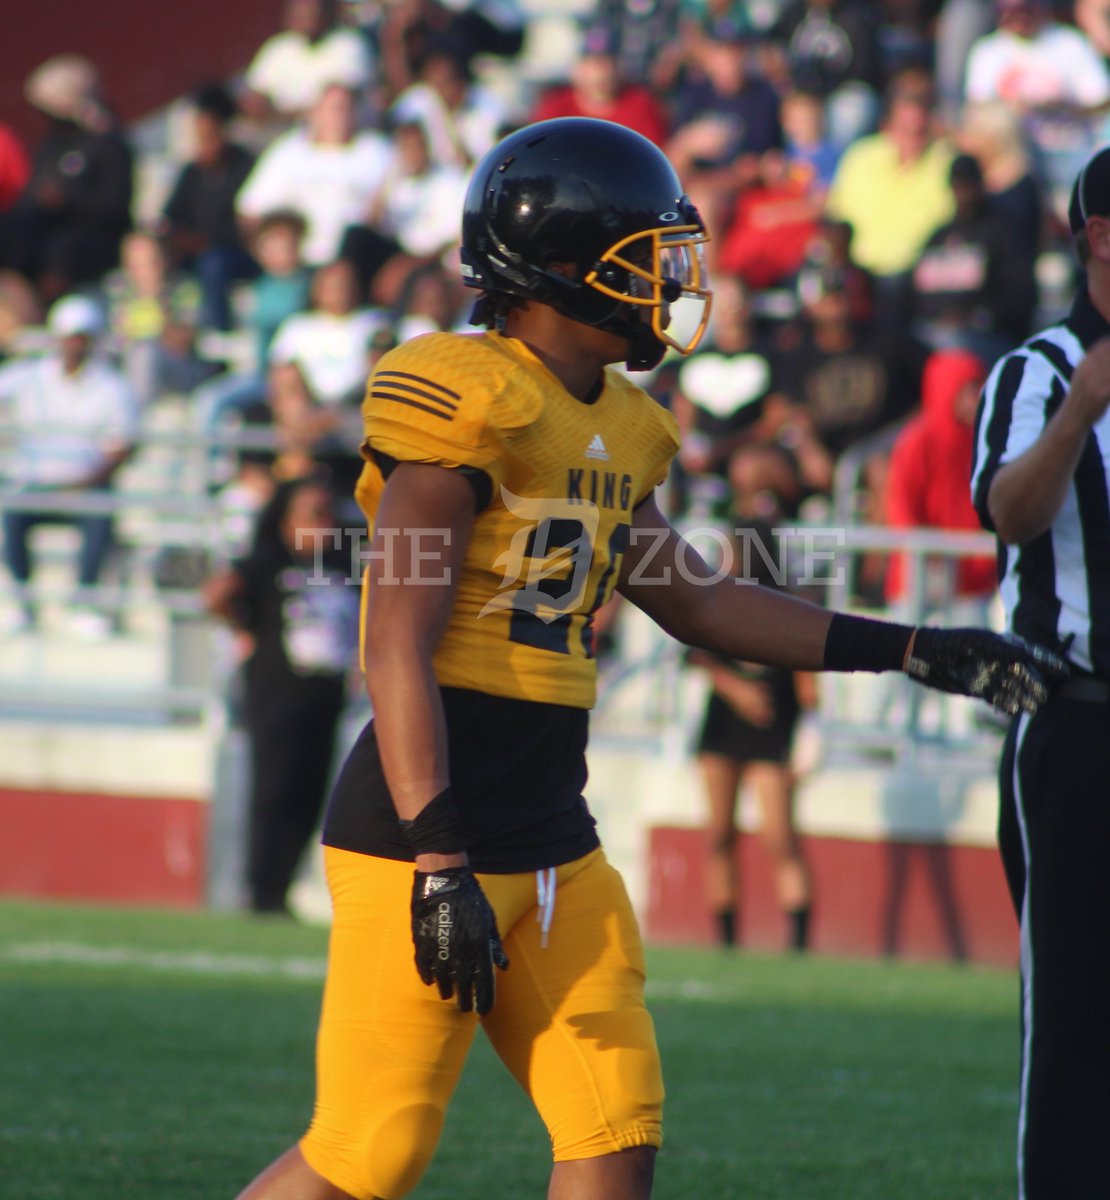 The D Zone Detroit King 21 S Rb Jaylen Reed Was Offered By Maryland T Co Vplcfgikjk